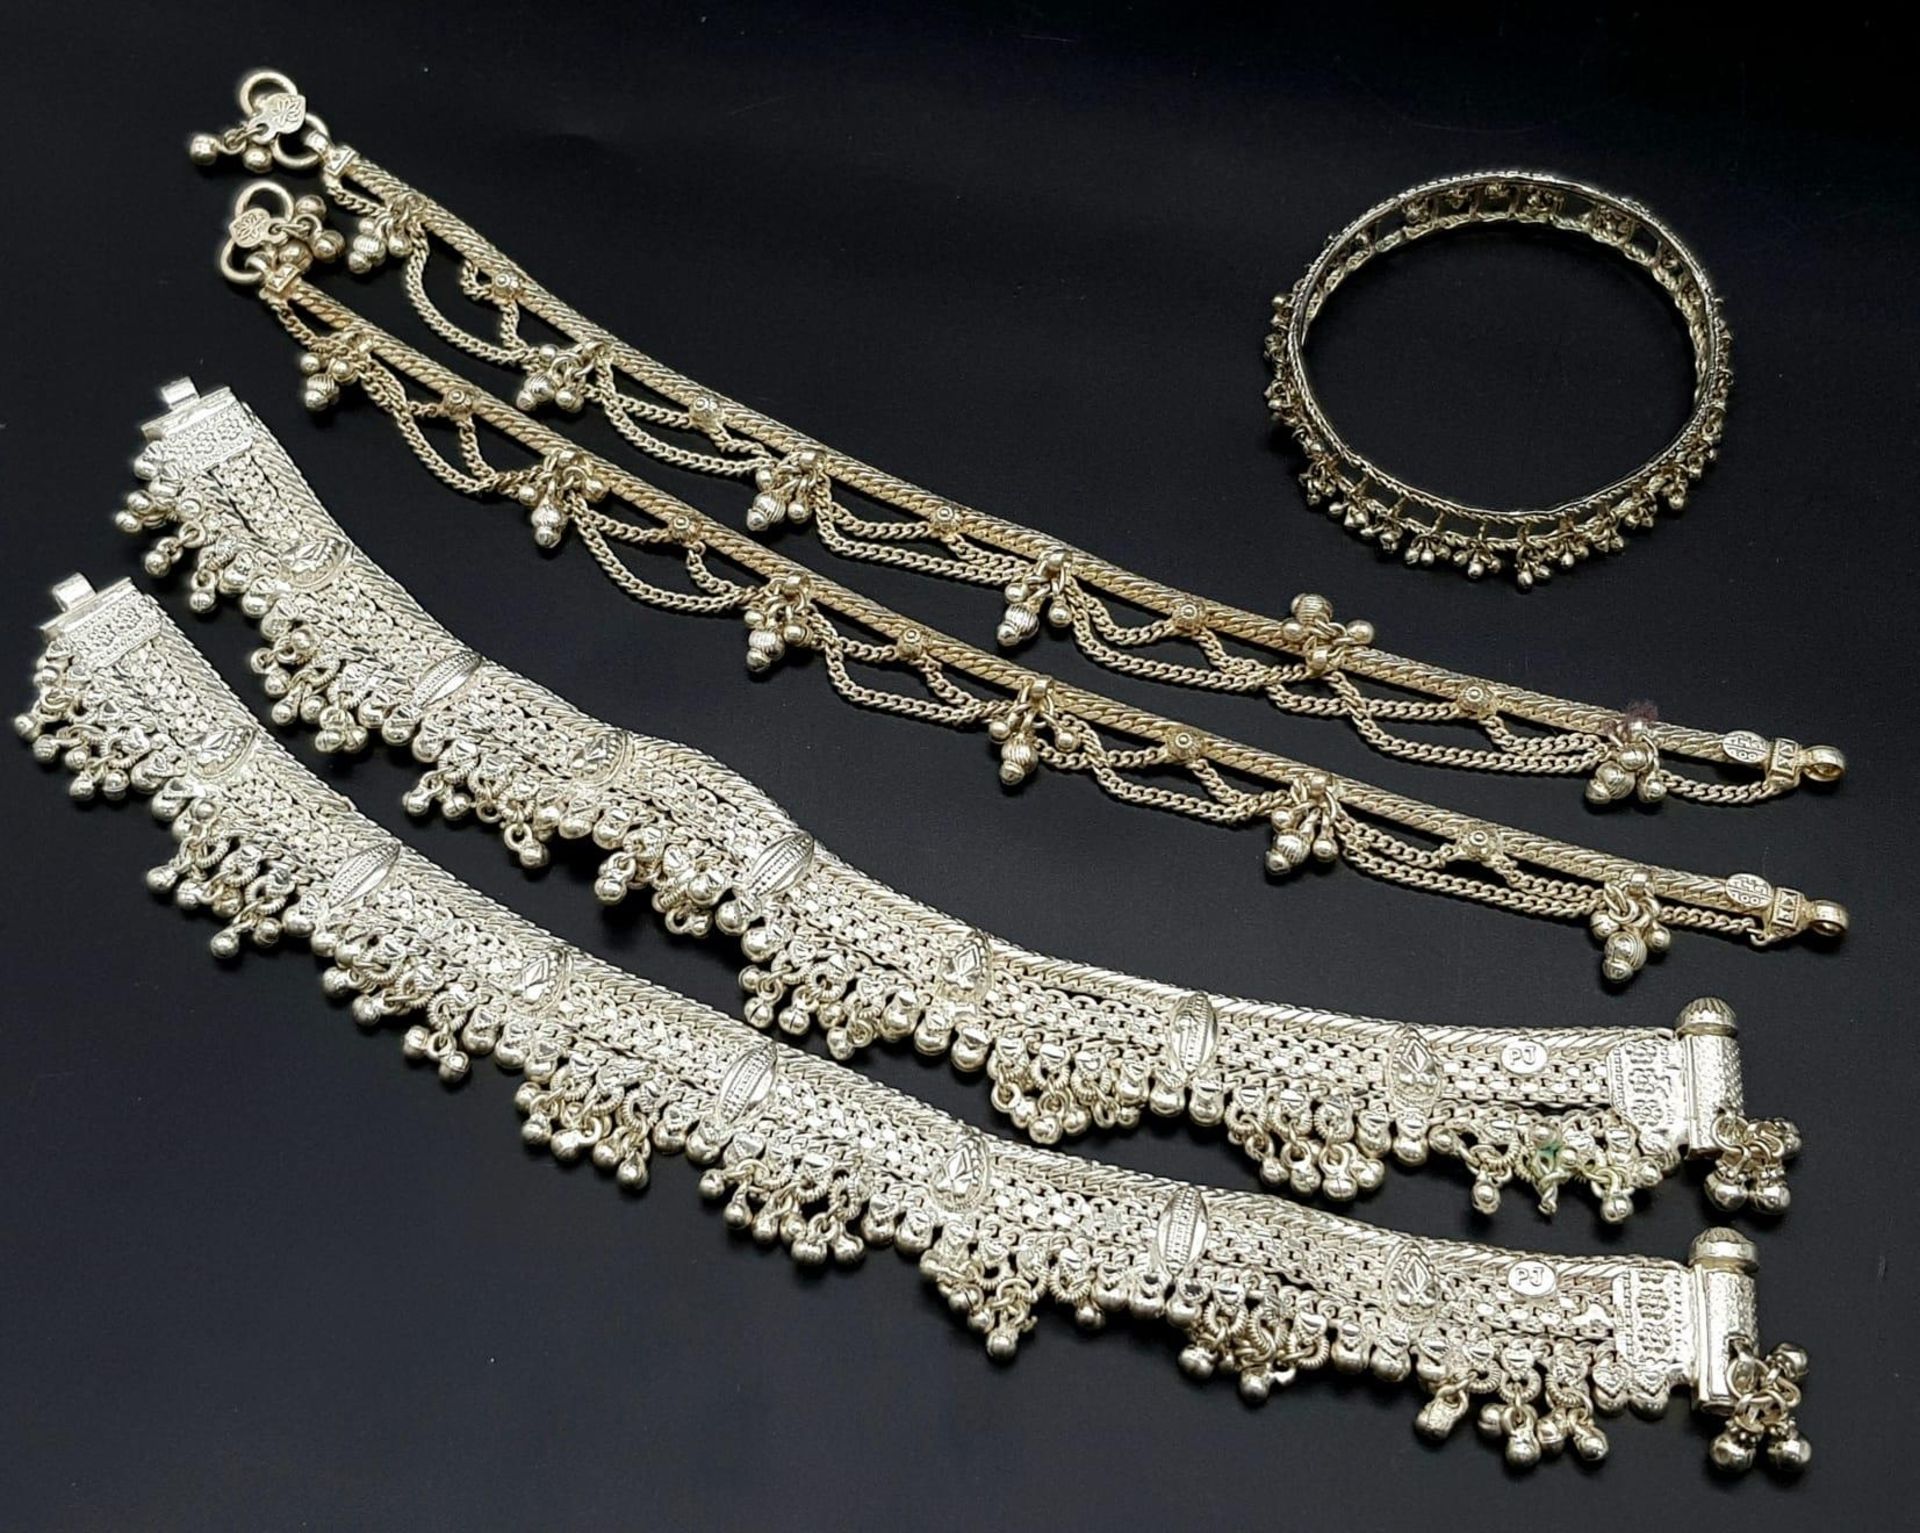 A Vintage Indian Silver (800) Jewellery Collection. Includes 4 upper arm decorative bands and one - Image 7 of 9